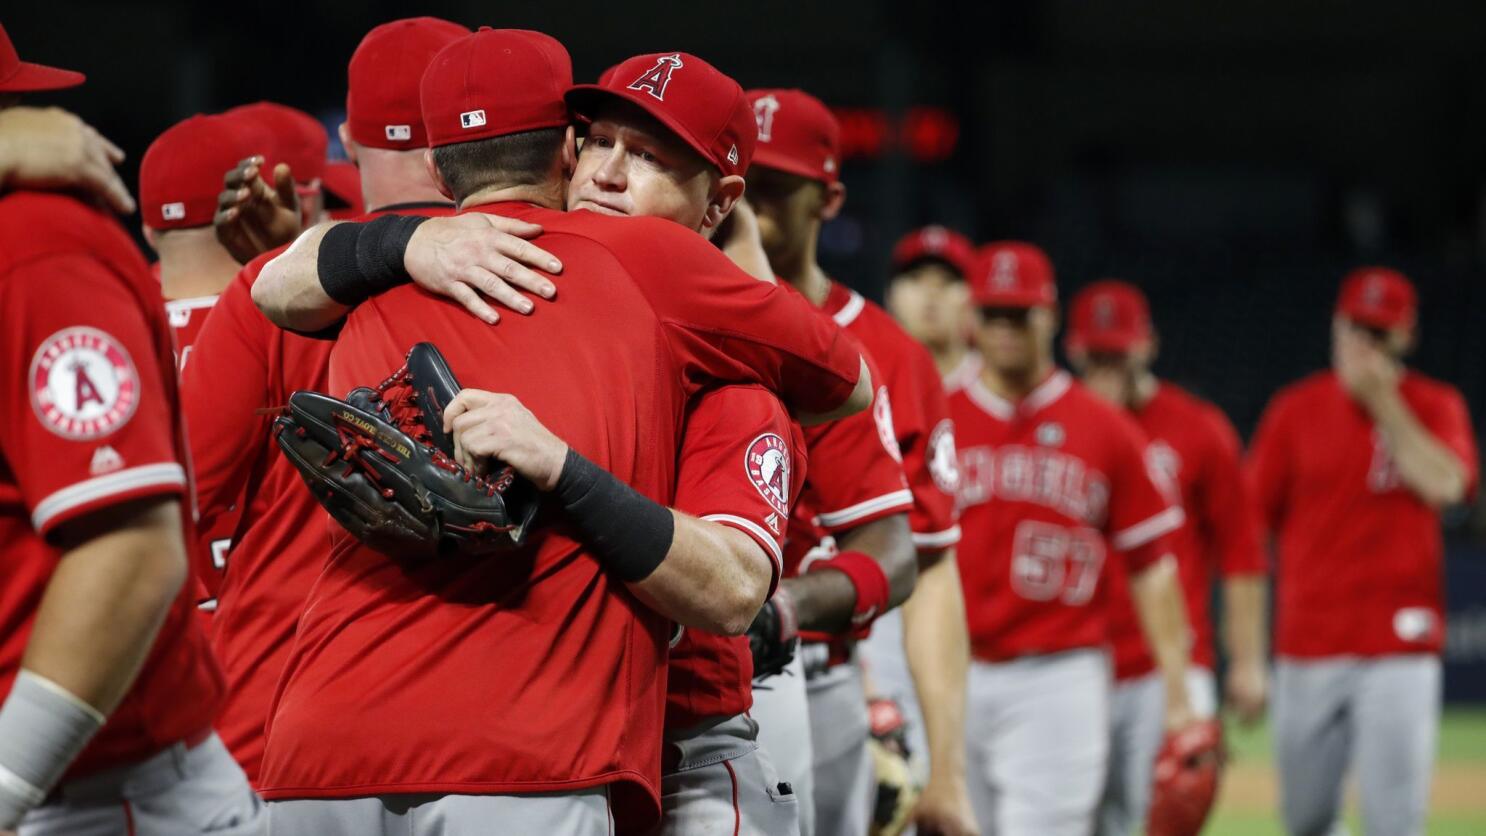 Fans react to death of MLB player Tyler Skaggs